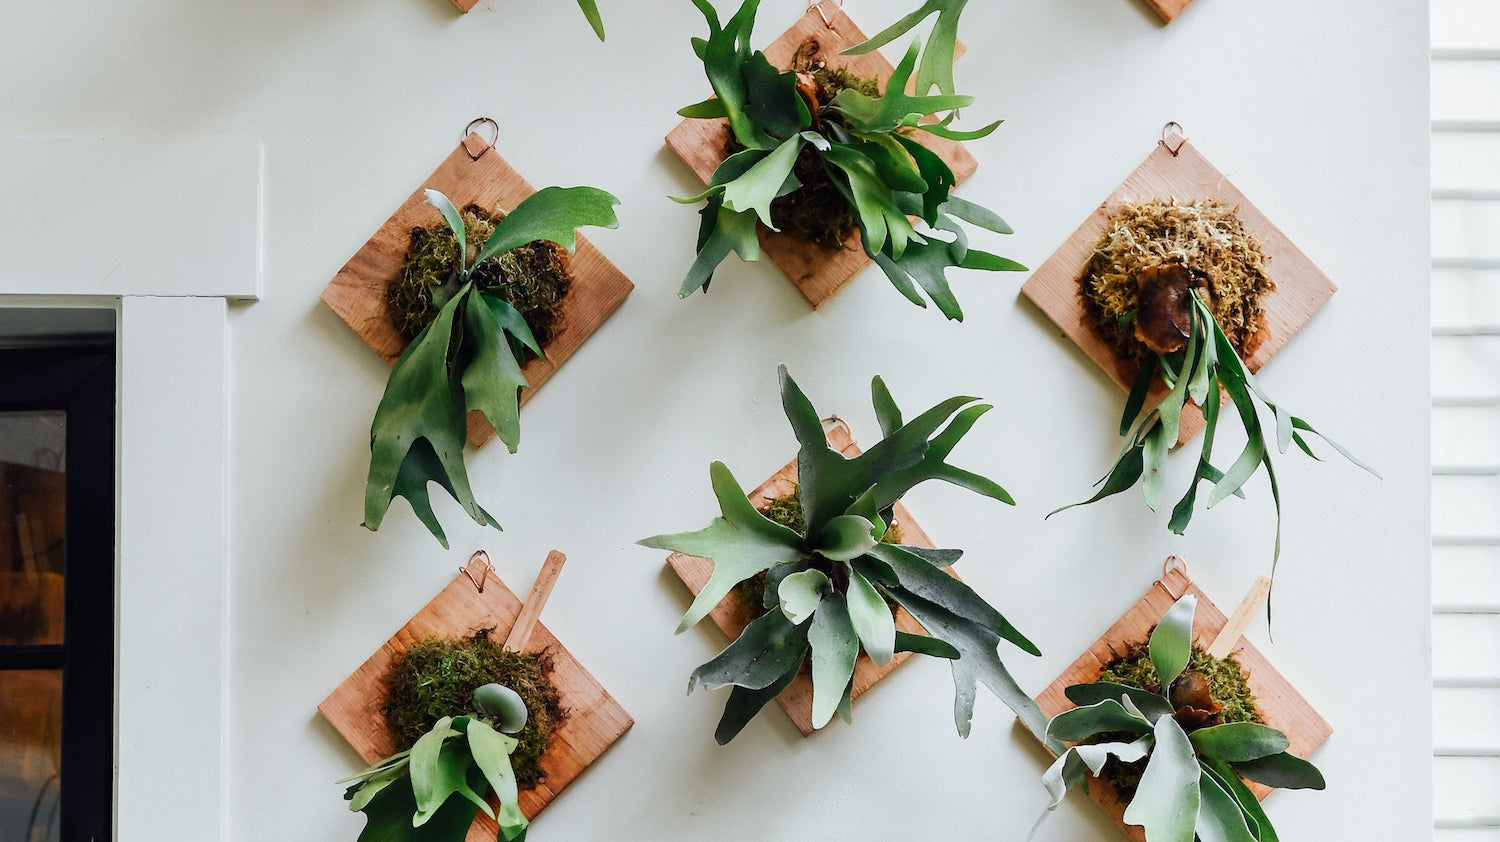 Staghorn Fern Care: How To Water, Grow and Care for Mounted Staghorn Ferns